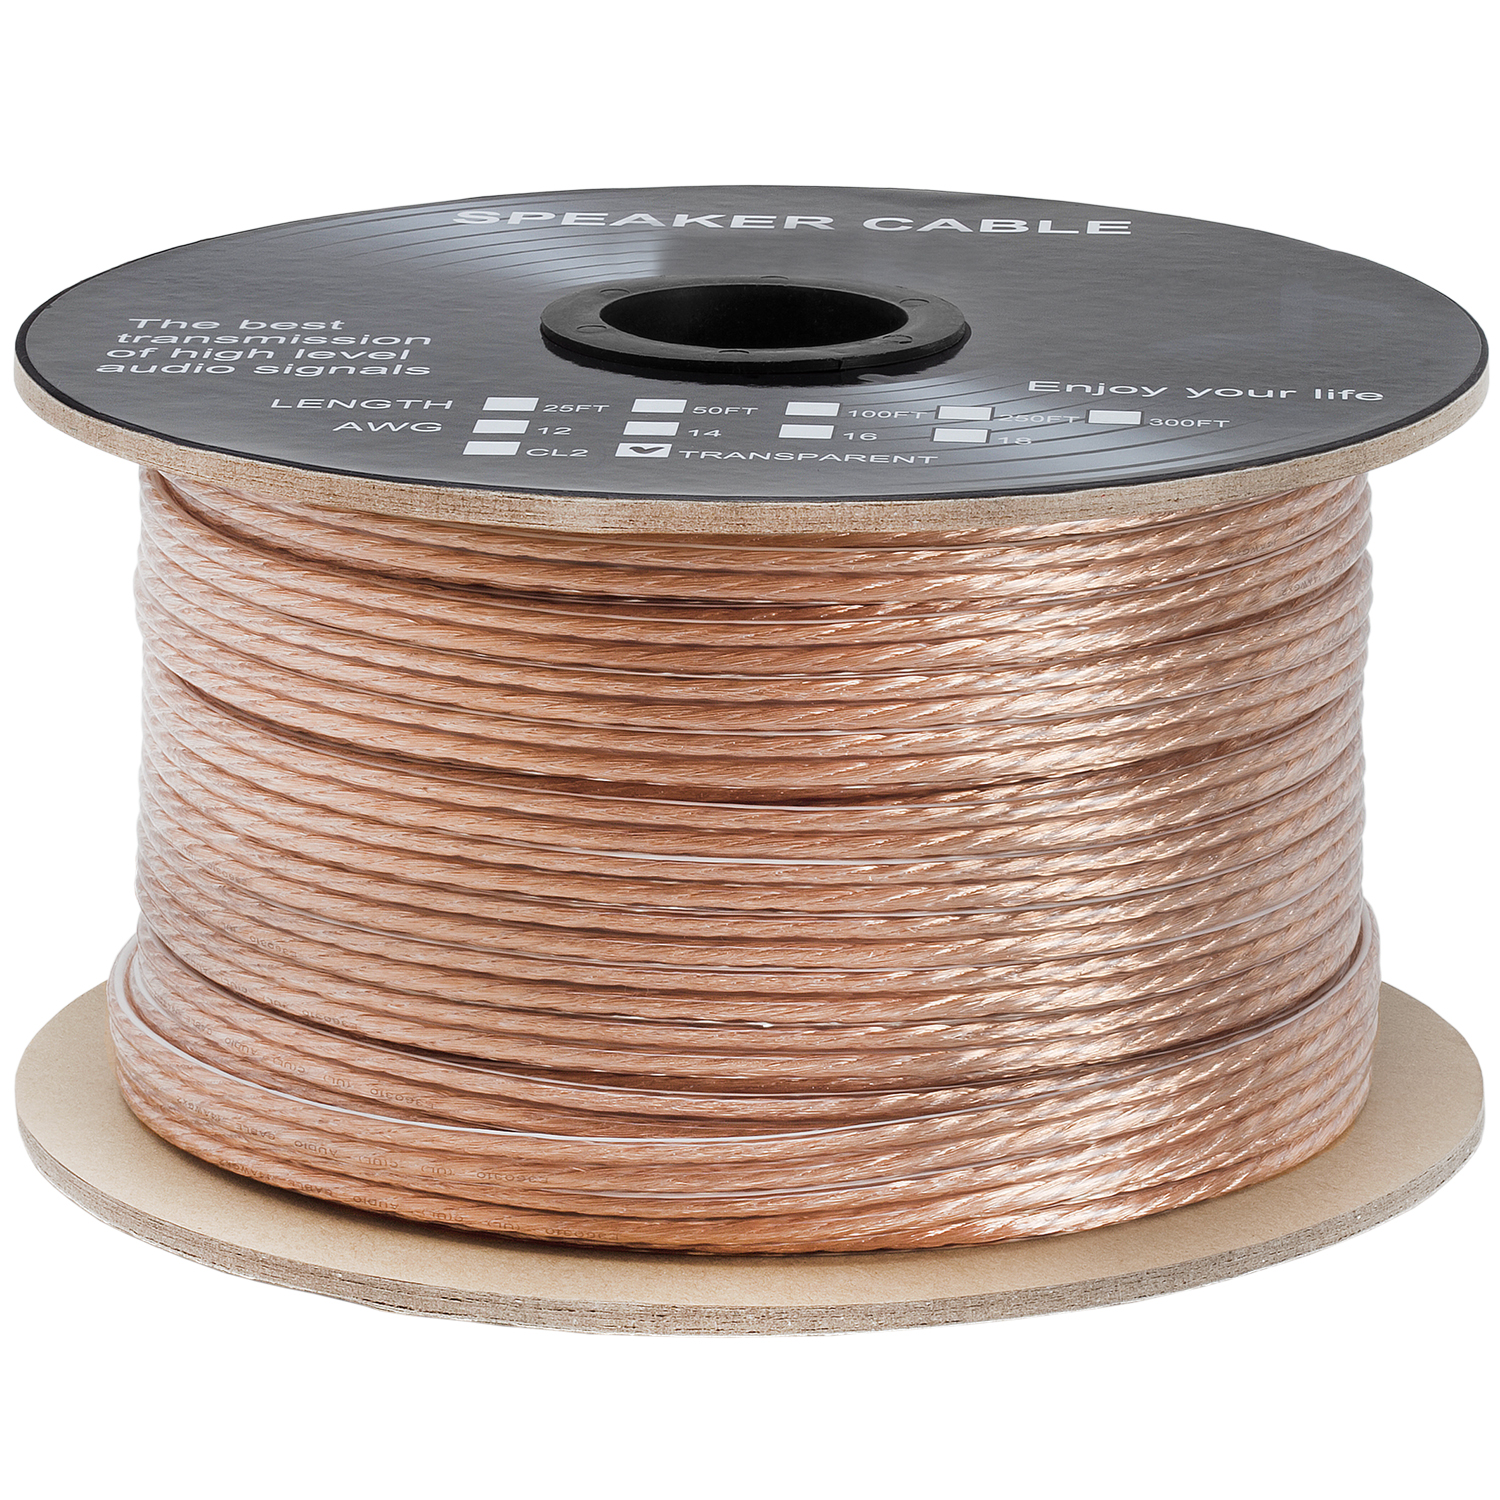 Cmple - 2 Conductor 12AWG Speaker Wire for Home Theater System, Amplifier, Car Audio Speaker Cable - 100 Feet, Clear - image 3 of 4